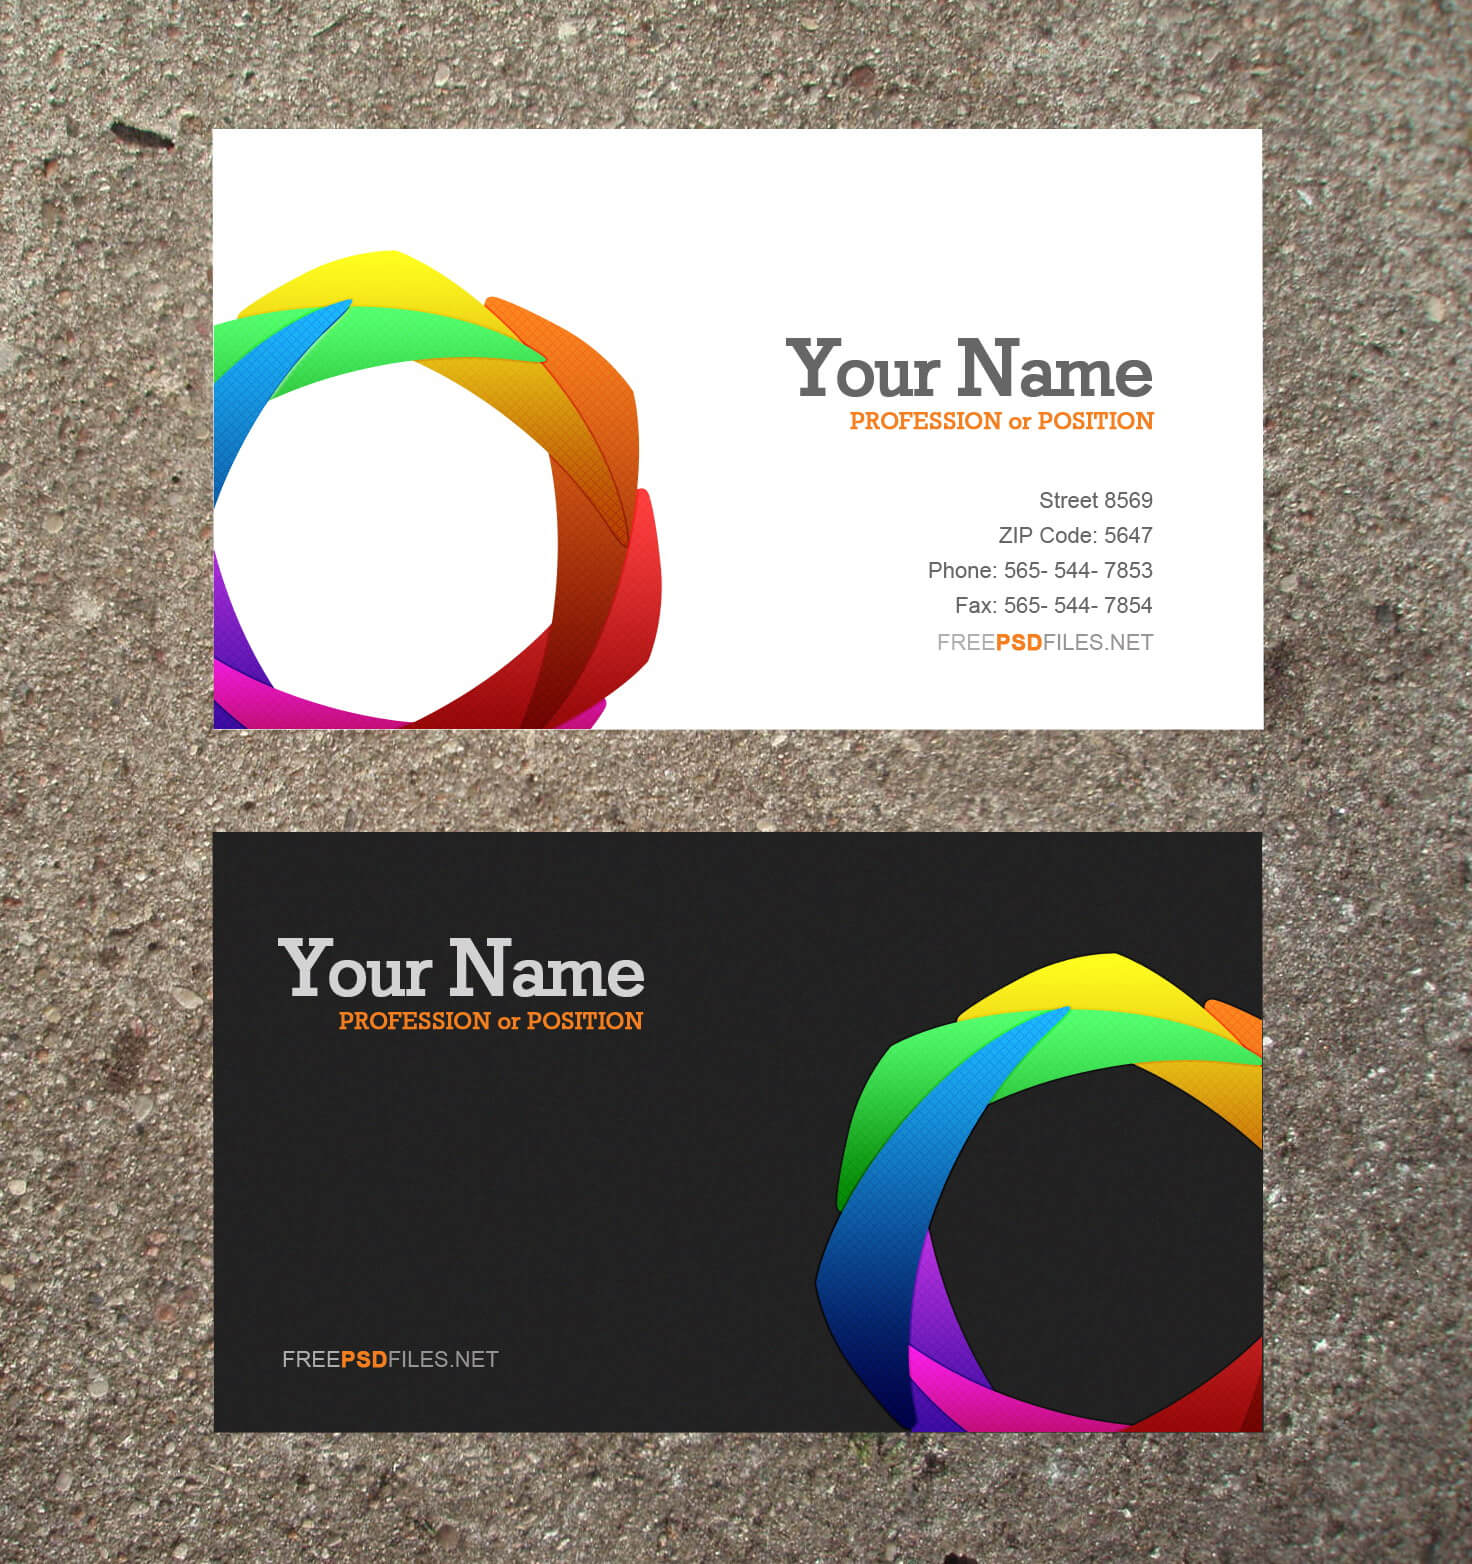 16 Business Card Templates Images – Free Business Card With Regard To Free Business Cards Templates For Word